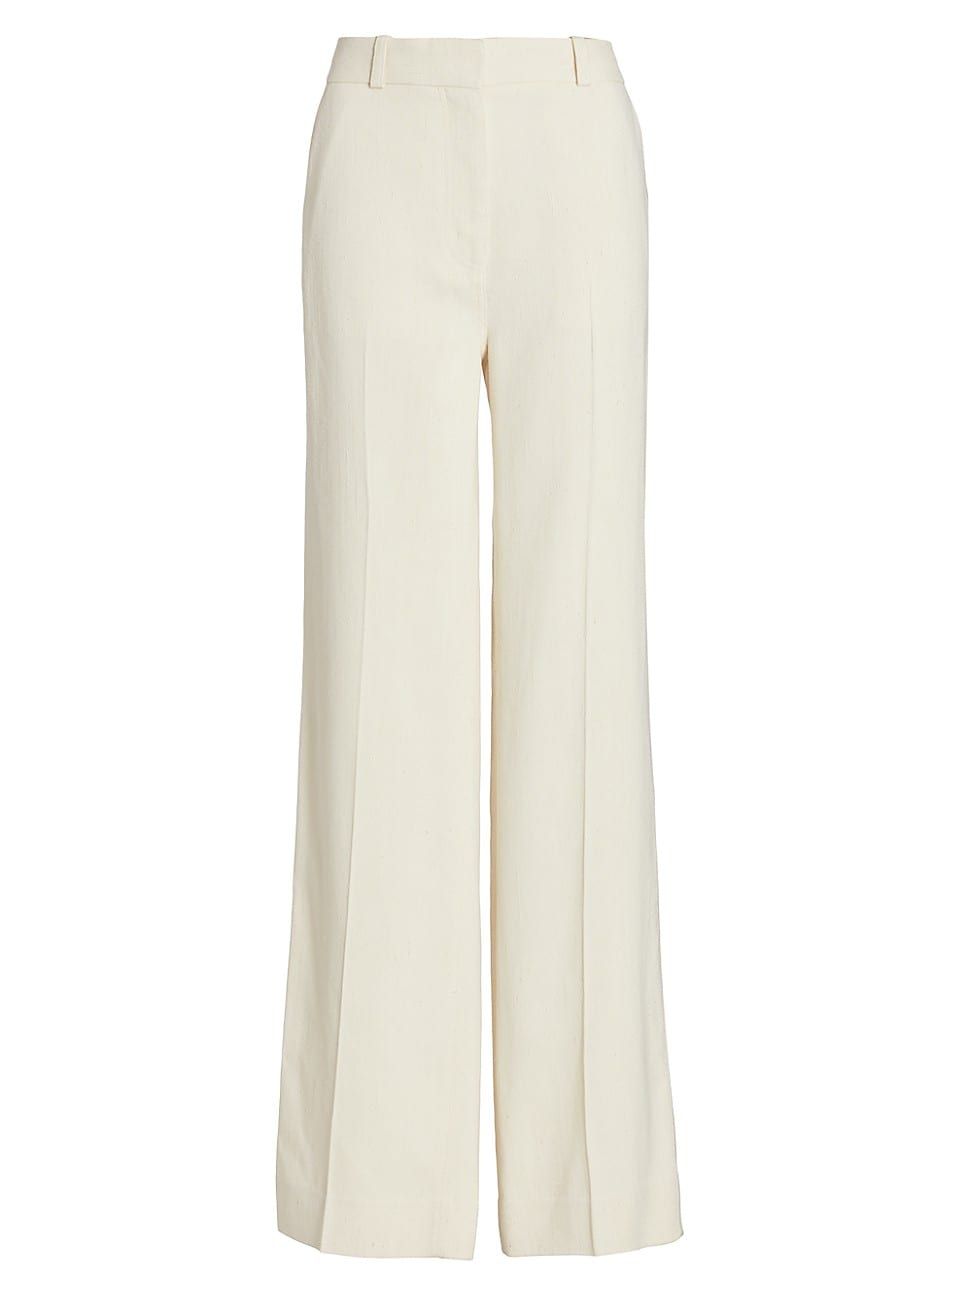 Women's Relaxed Tailored Trousers - Off White - Size 8 - Off White - Size 8 | Saks Fifth Avenue